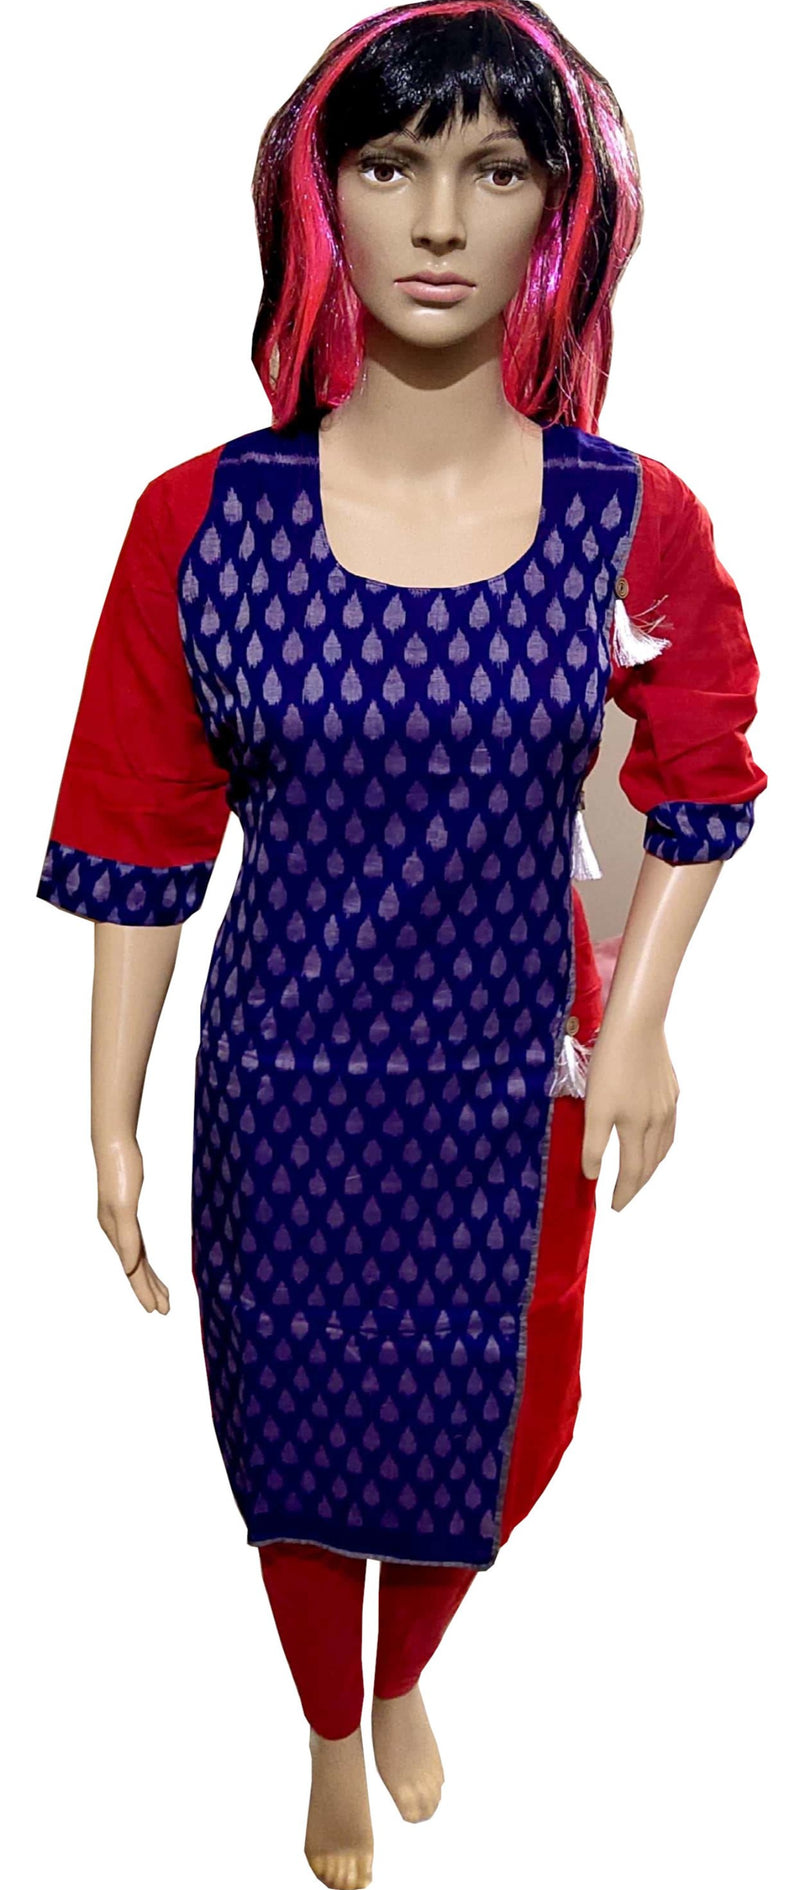 Hot Selling Collection of F Kurtis